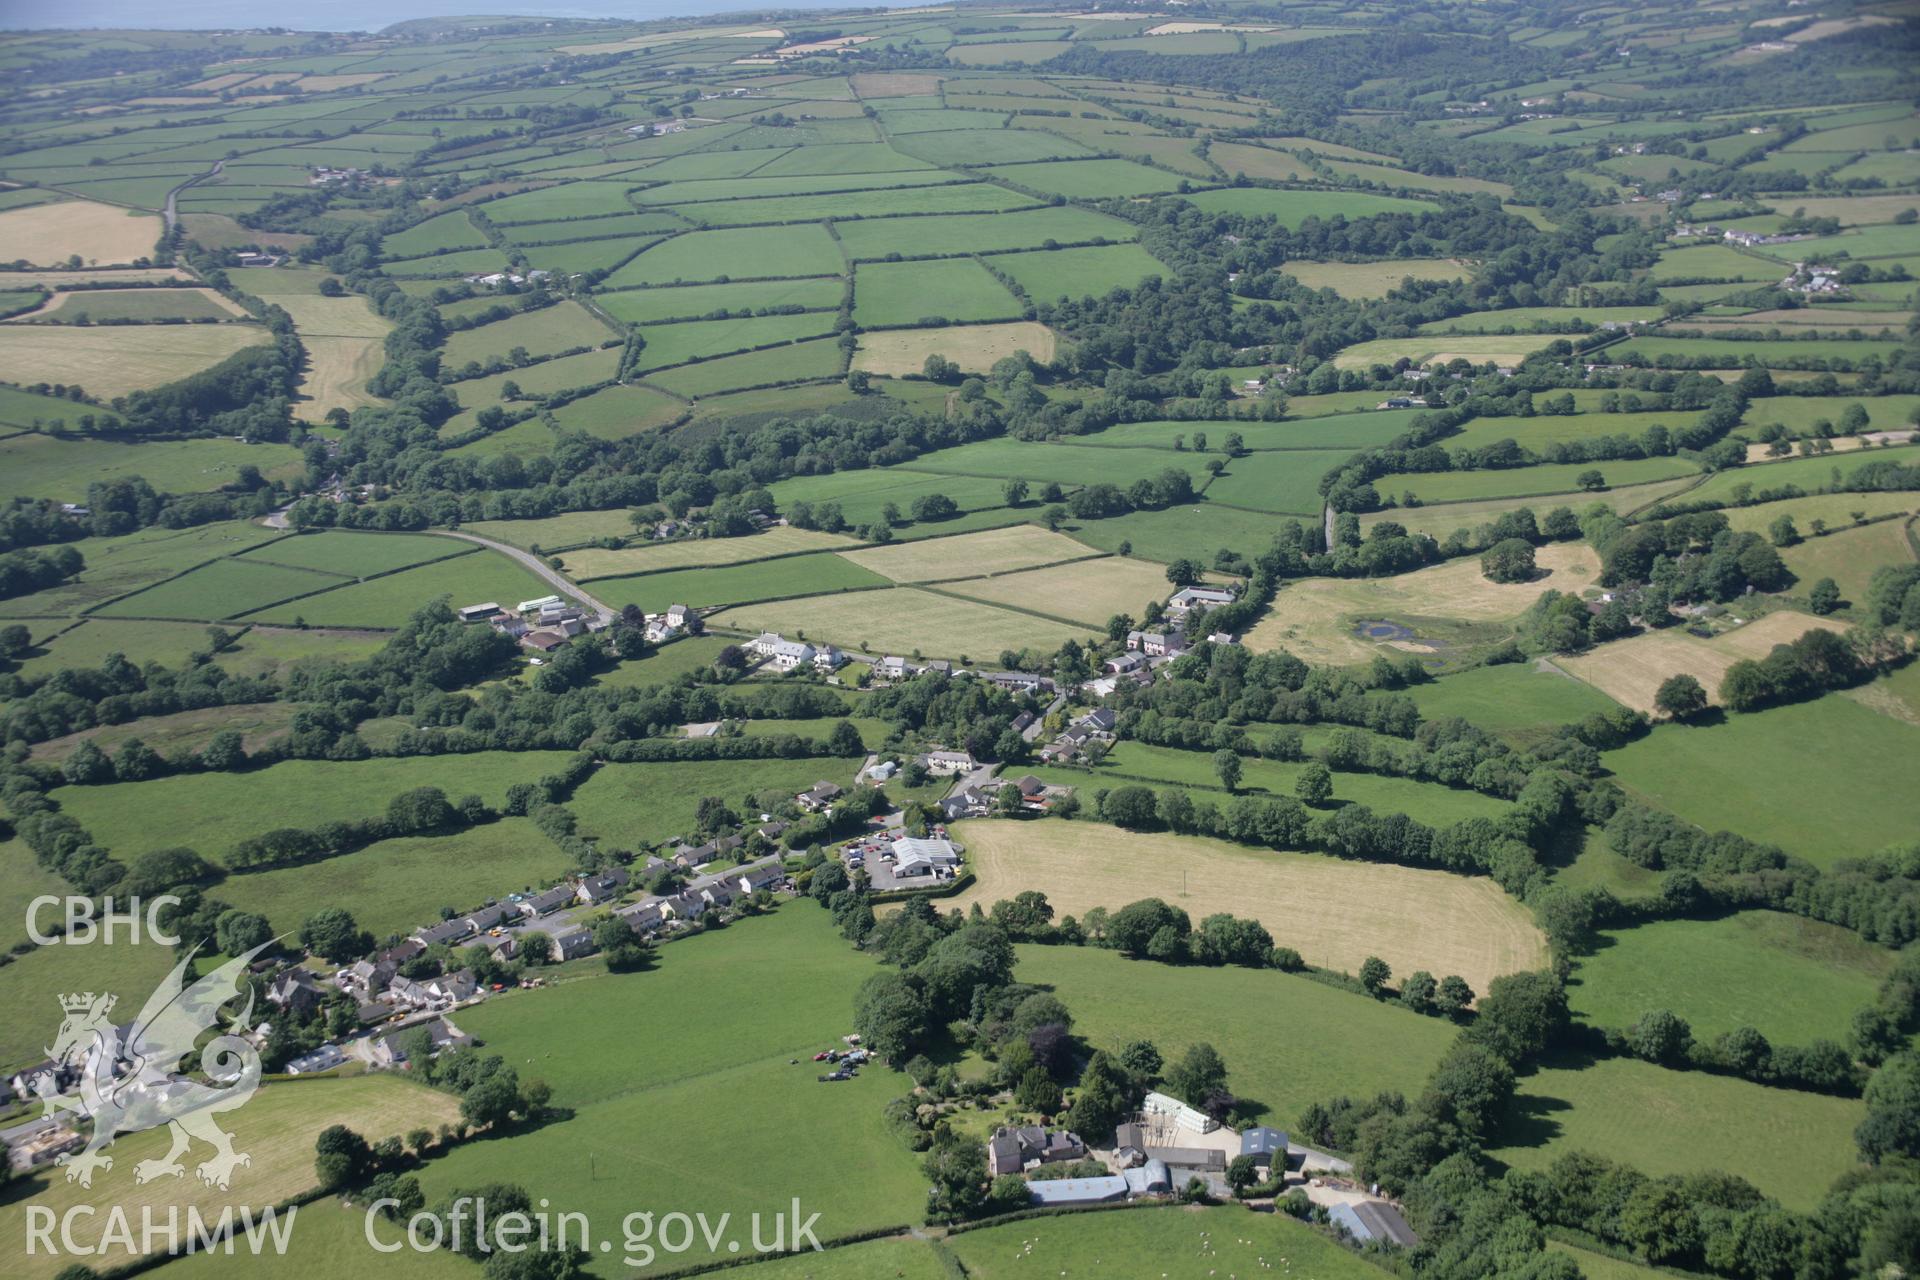 RCAHMW colour oblique aerial photograph of Rhydlewis from the south-east. Taken on 23 June 2005 by Toby Driver